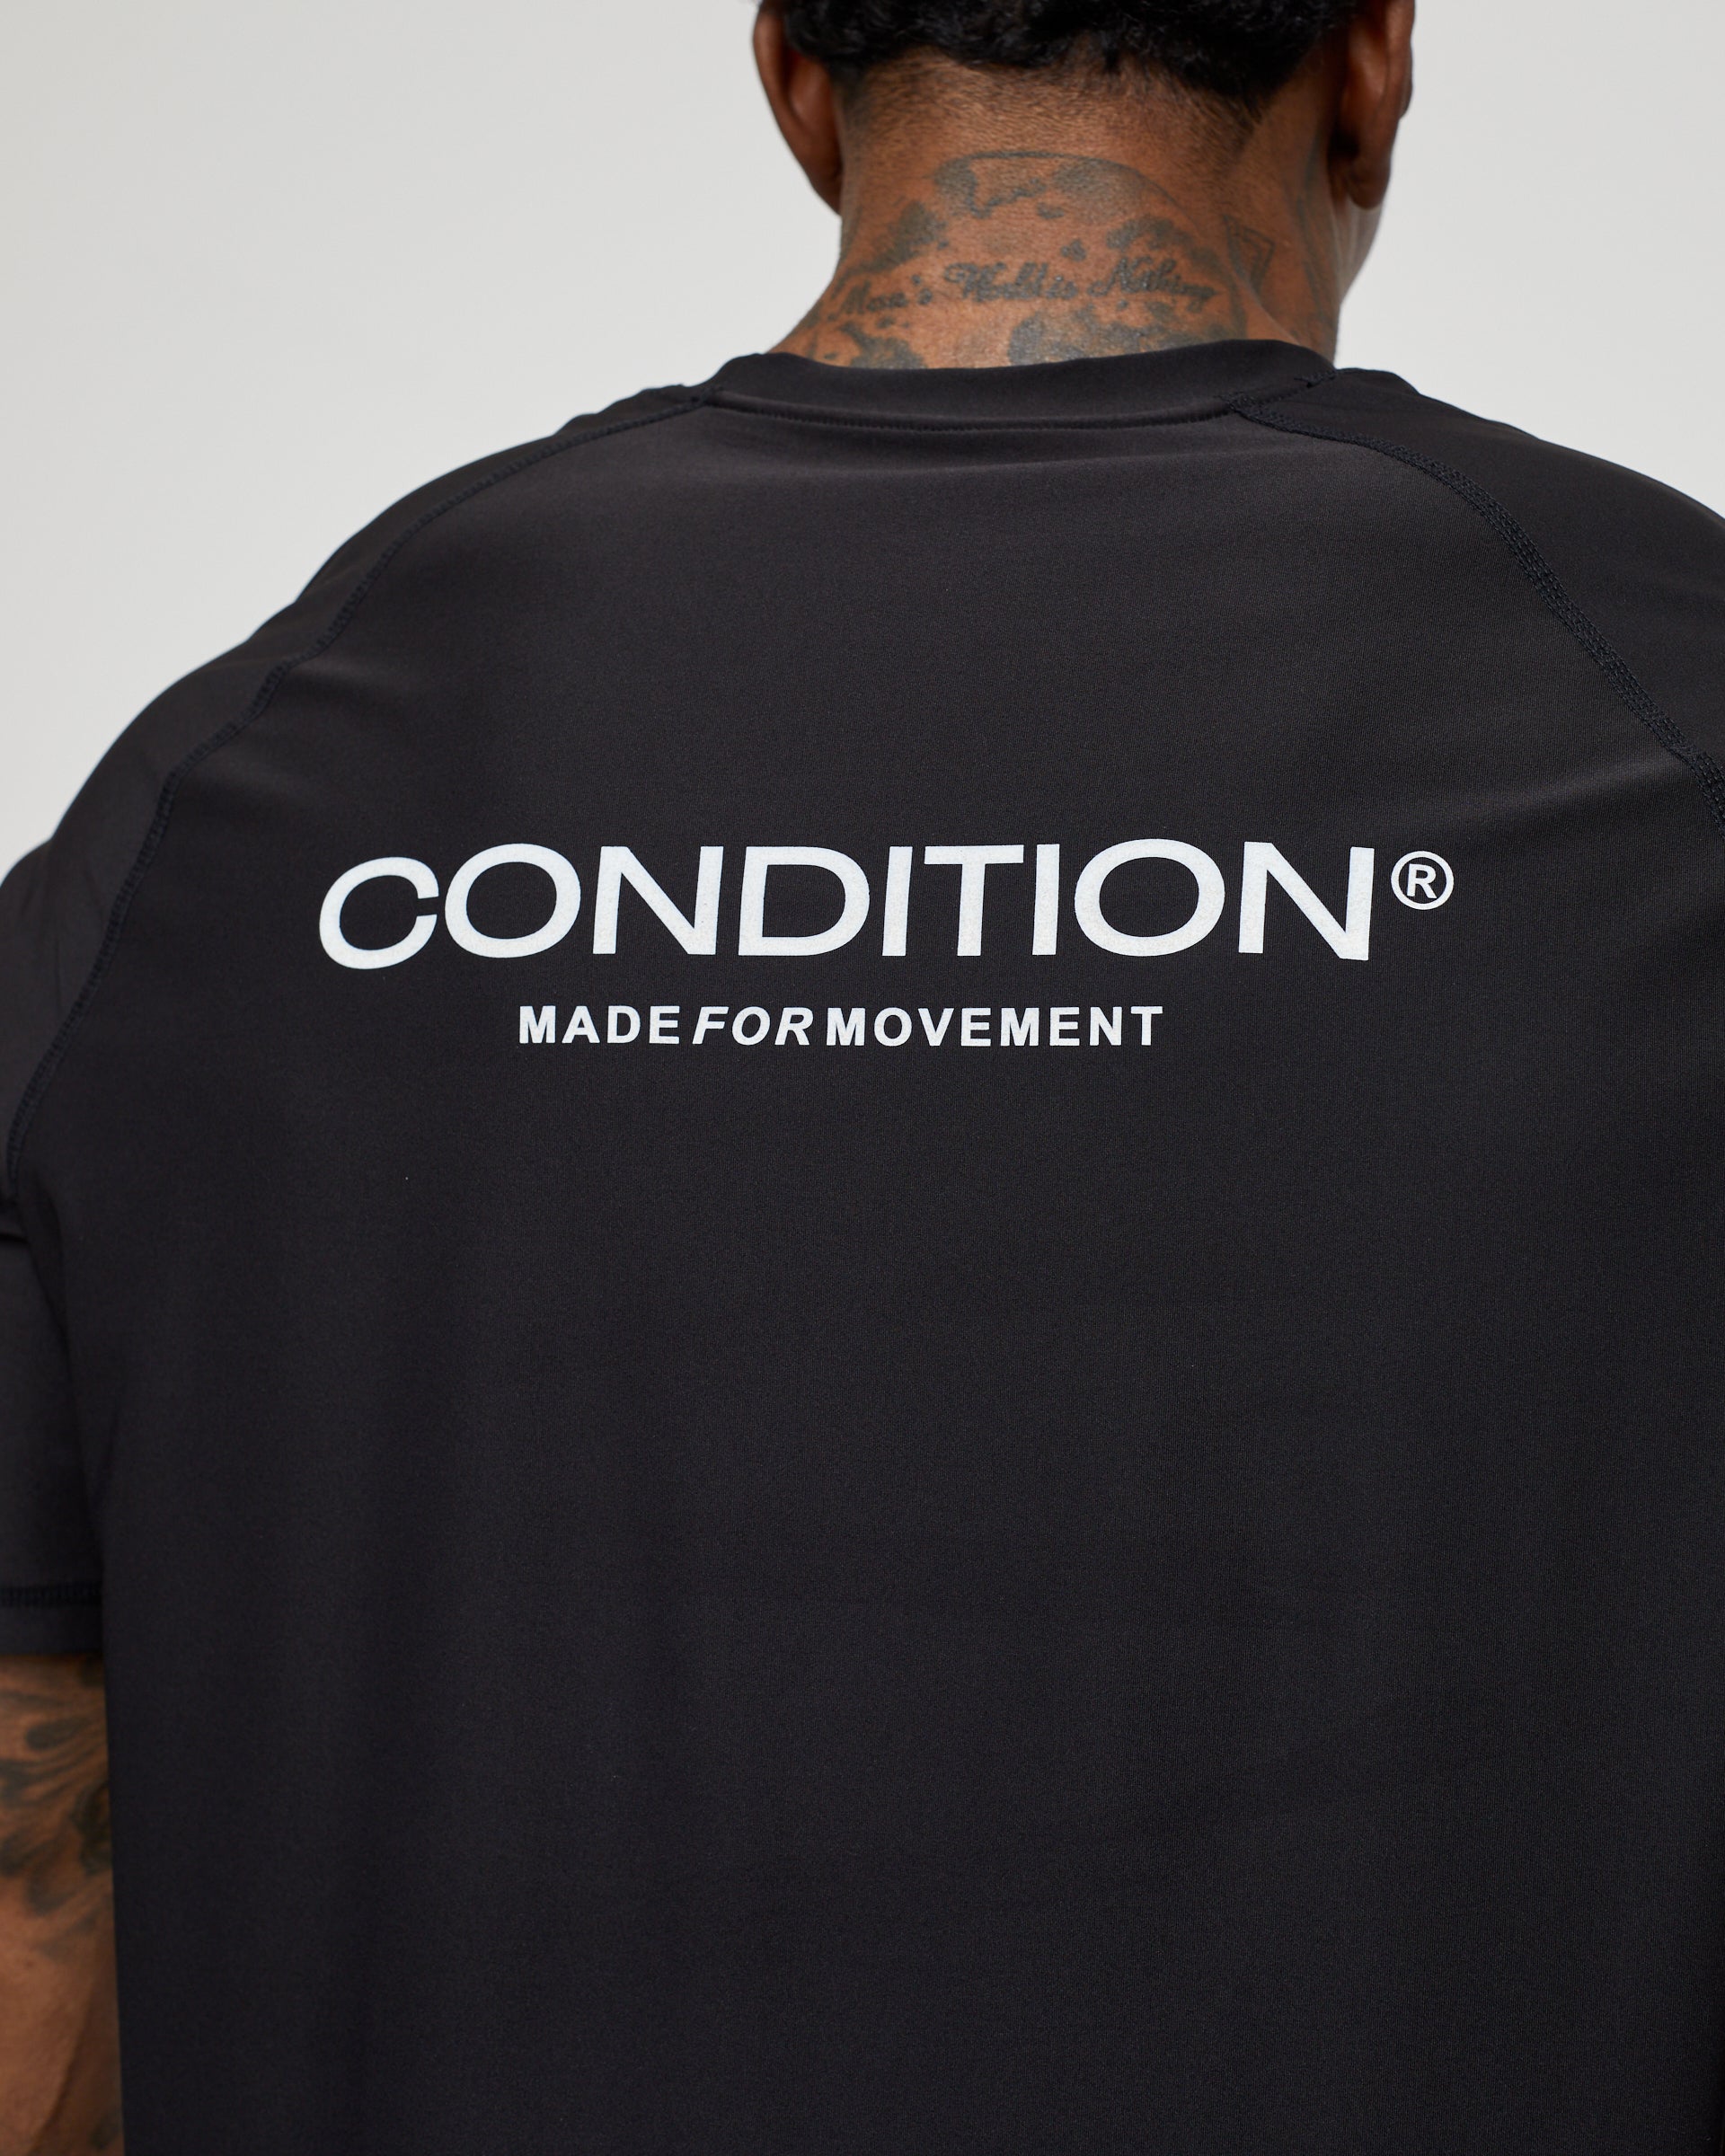 MADE FOR MOVEMENT TSHIRT